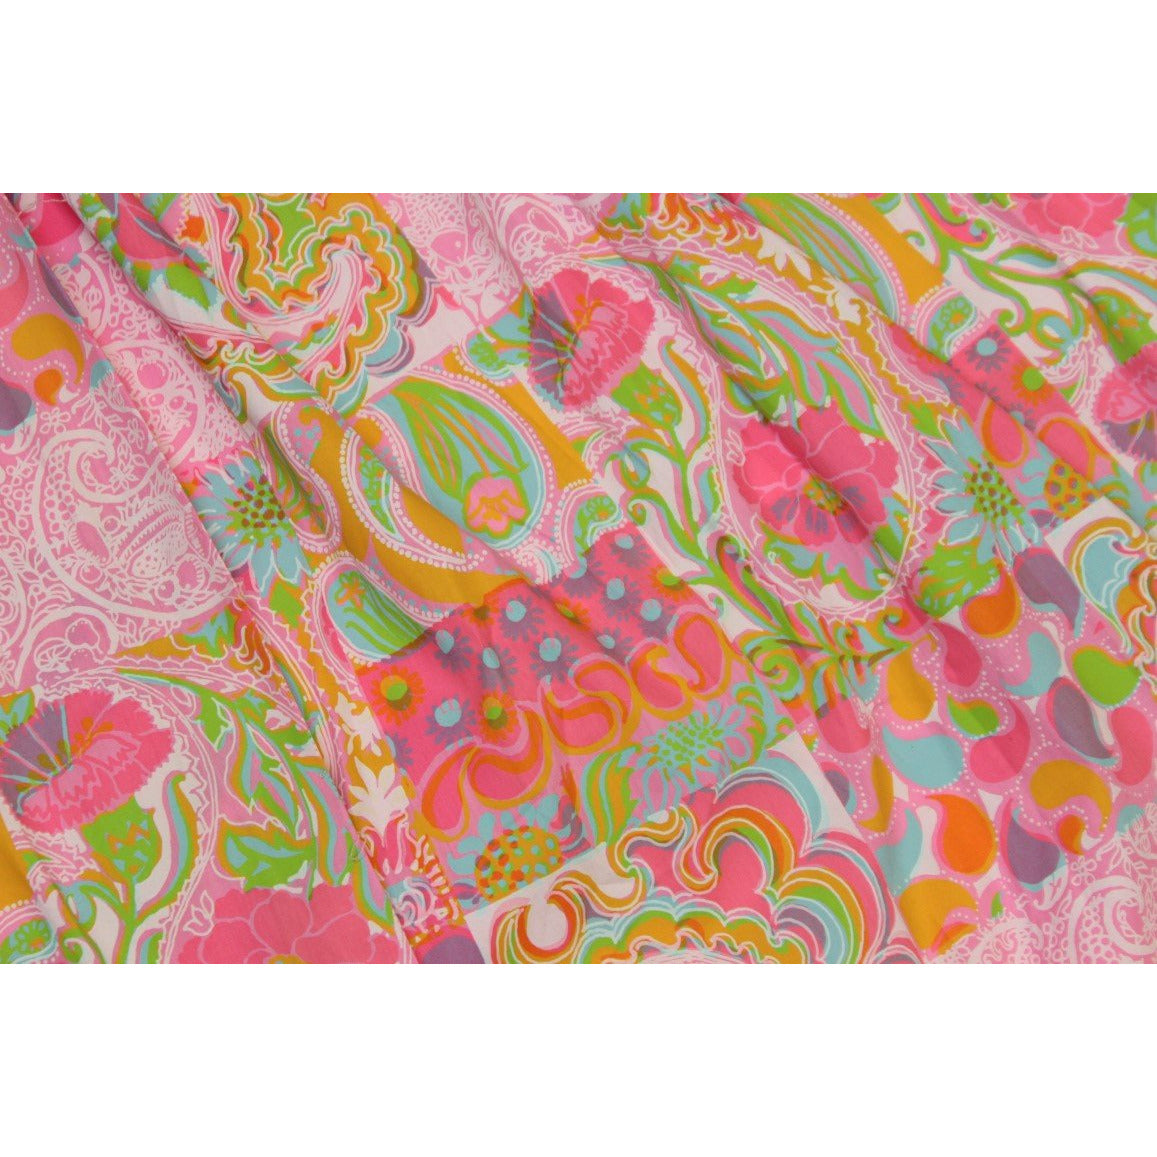 Key West Multicolor Tropical Floral & Paisley Print Glazed Fabric